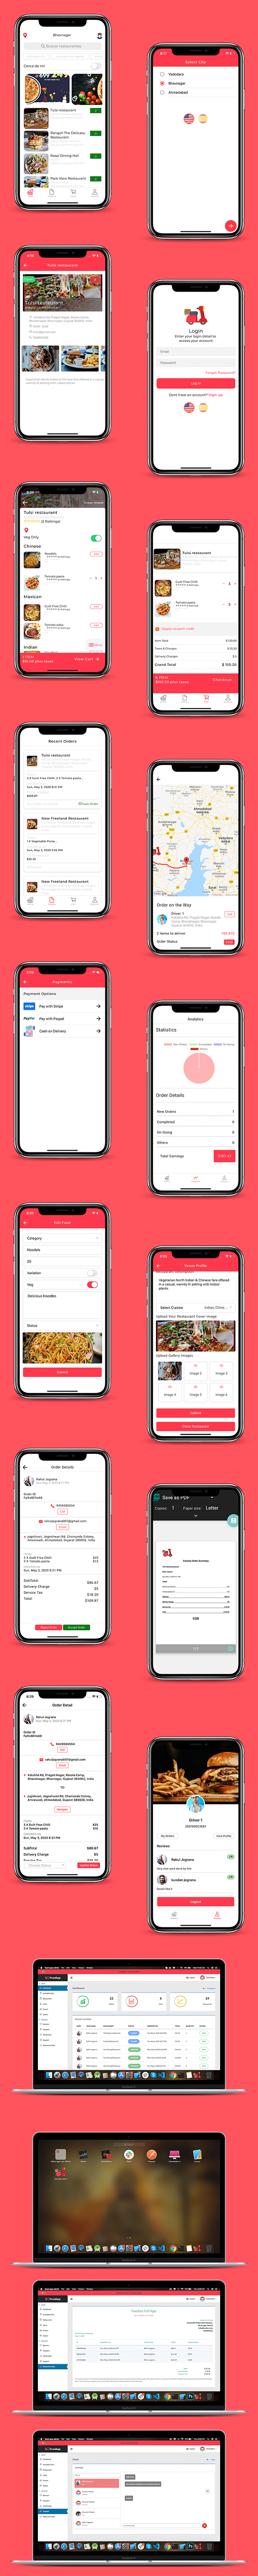 ionic 5 food delivery full (Android + iOS + Admin Panel PWA) app with firebase - 18